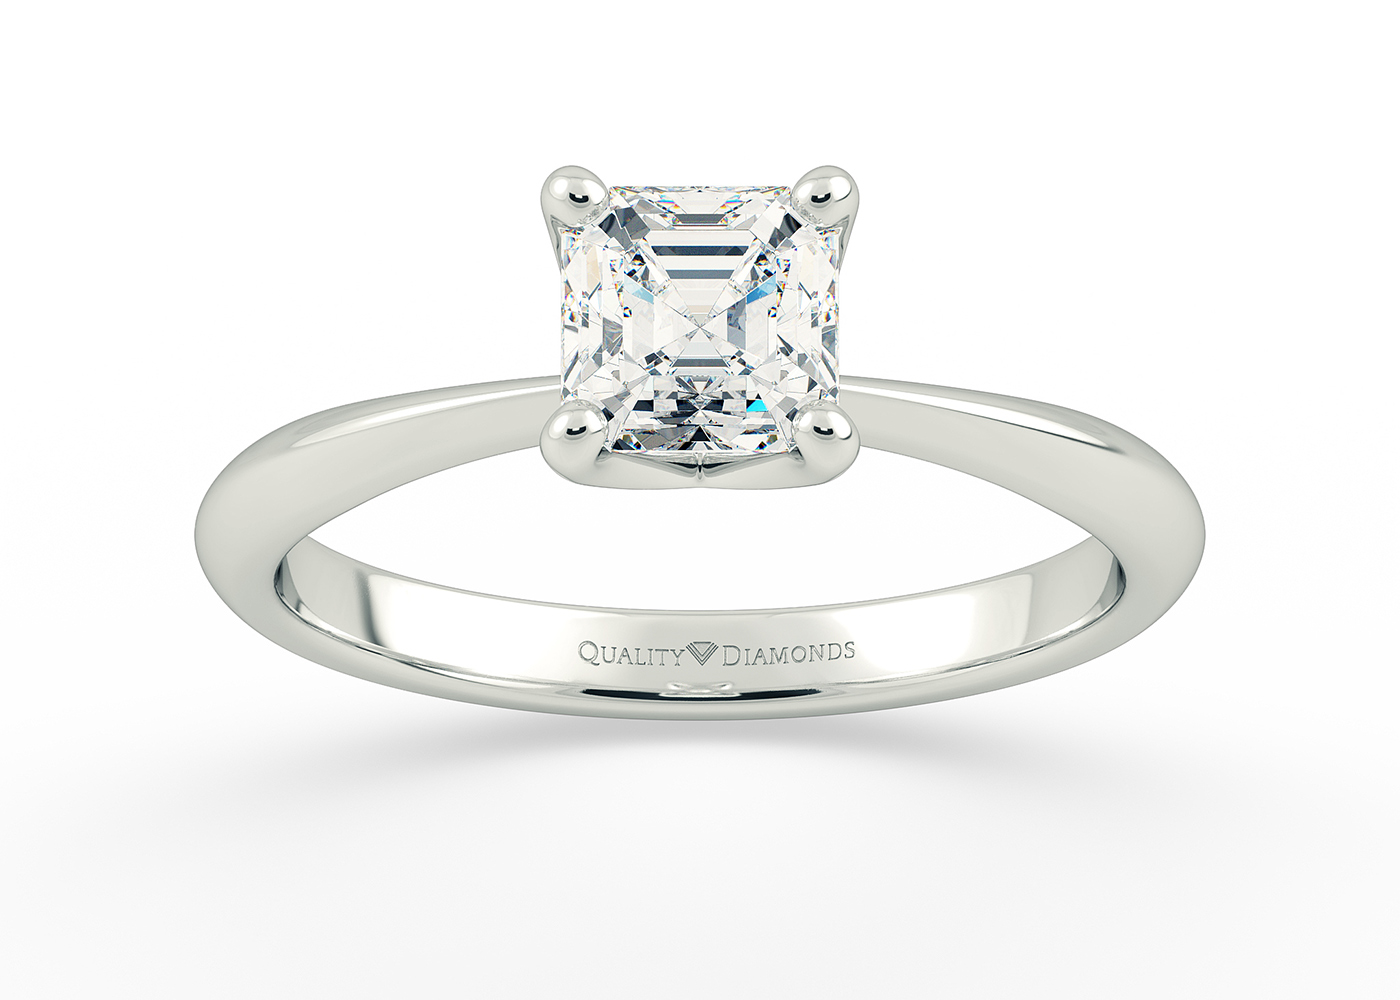 One Carat Asscher Solitaire Diamond Engagement Ring in 18K White Gold